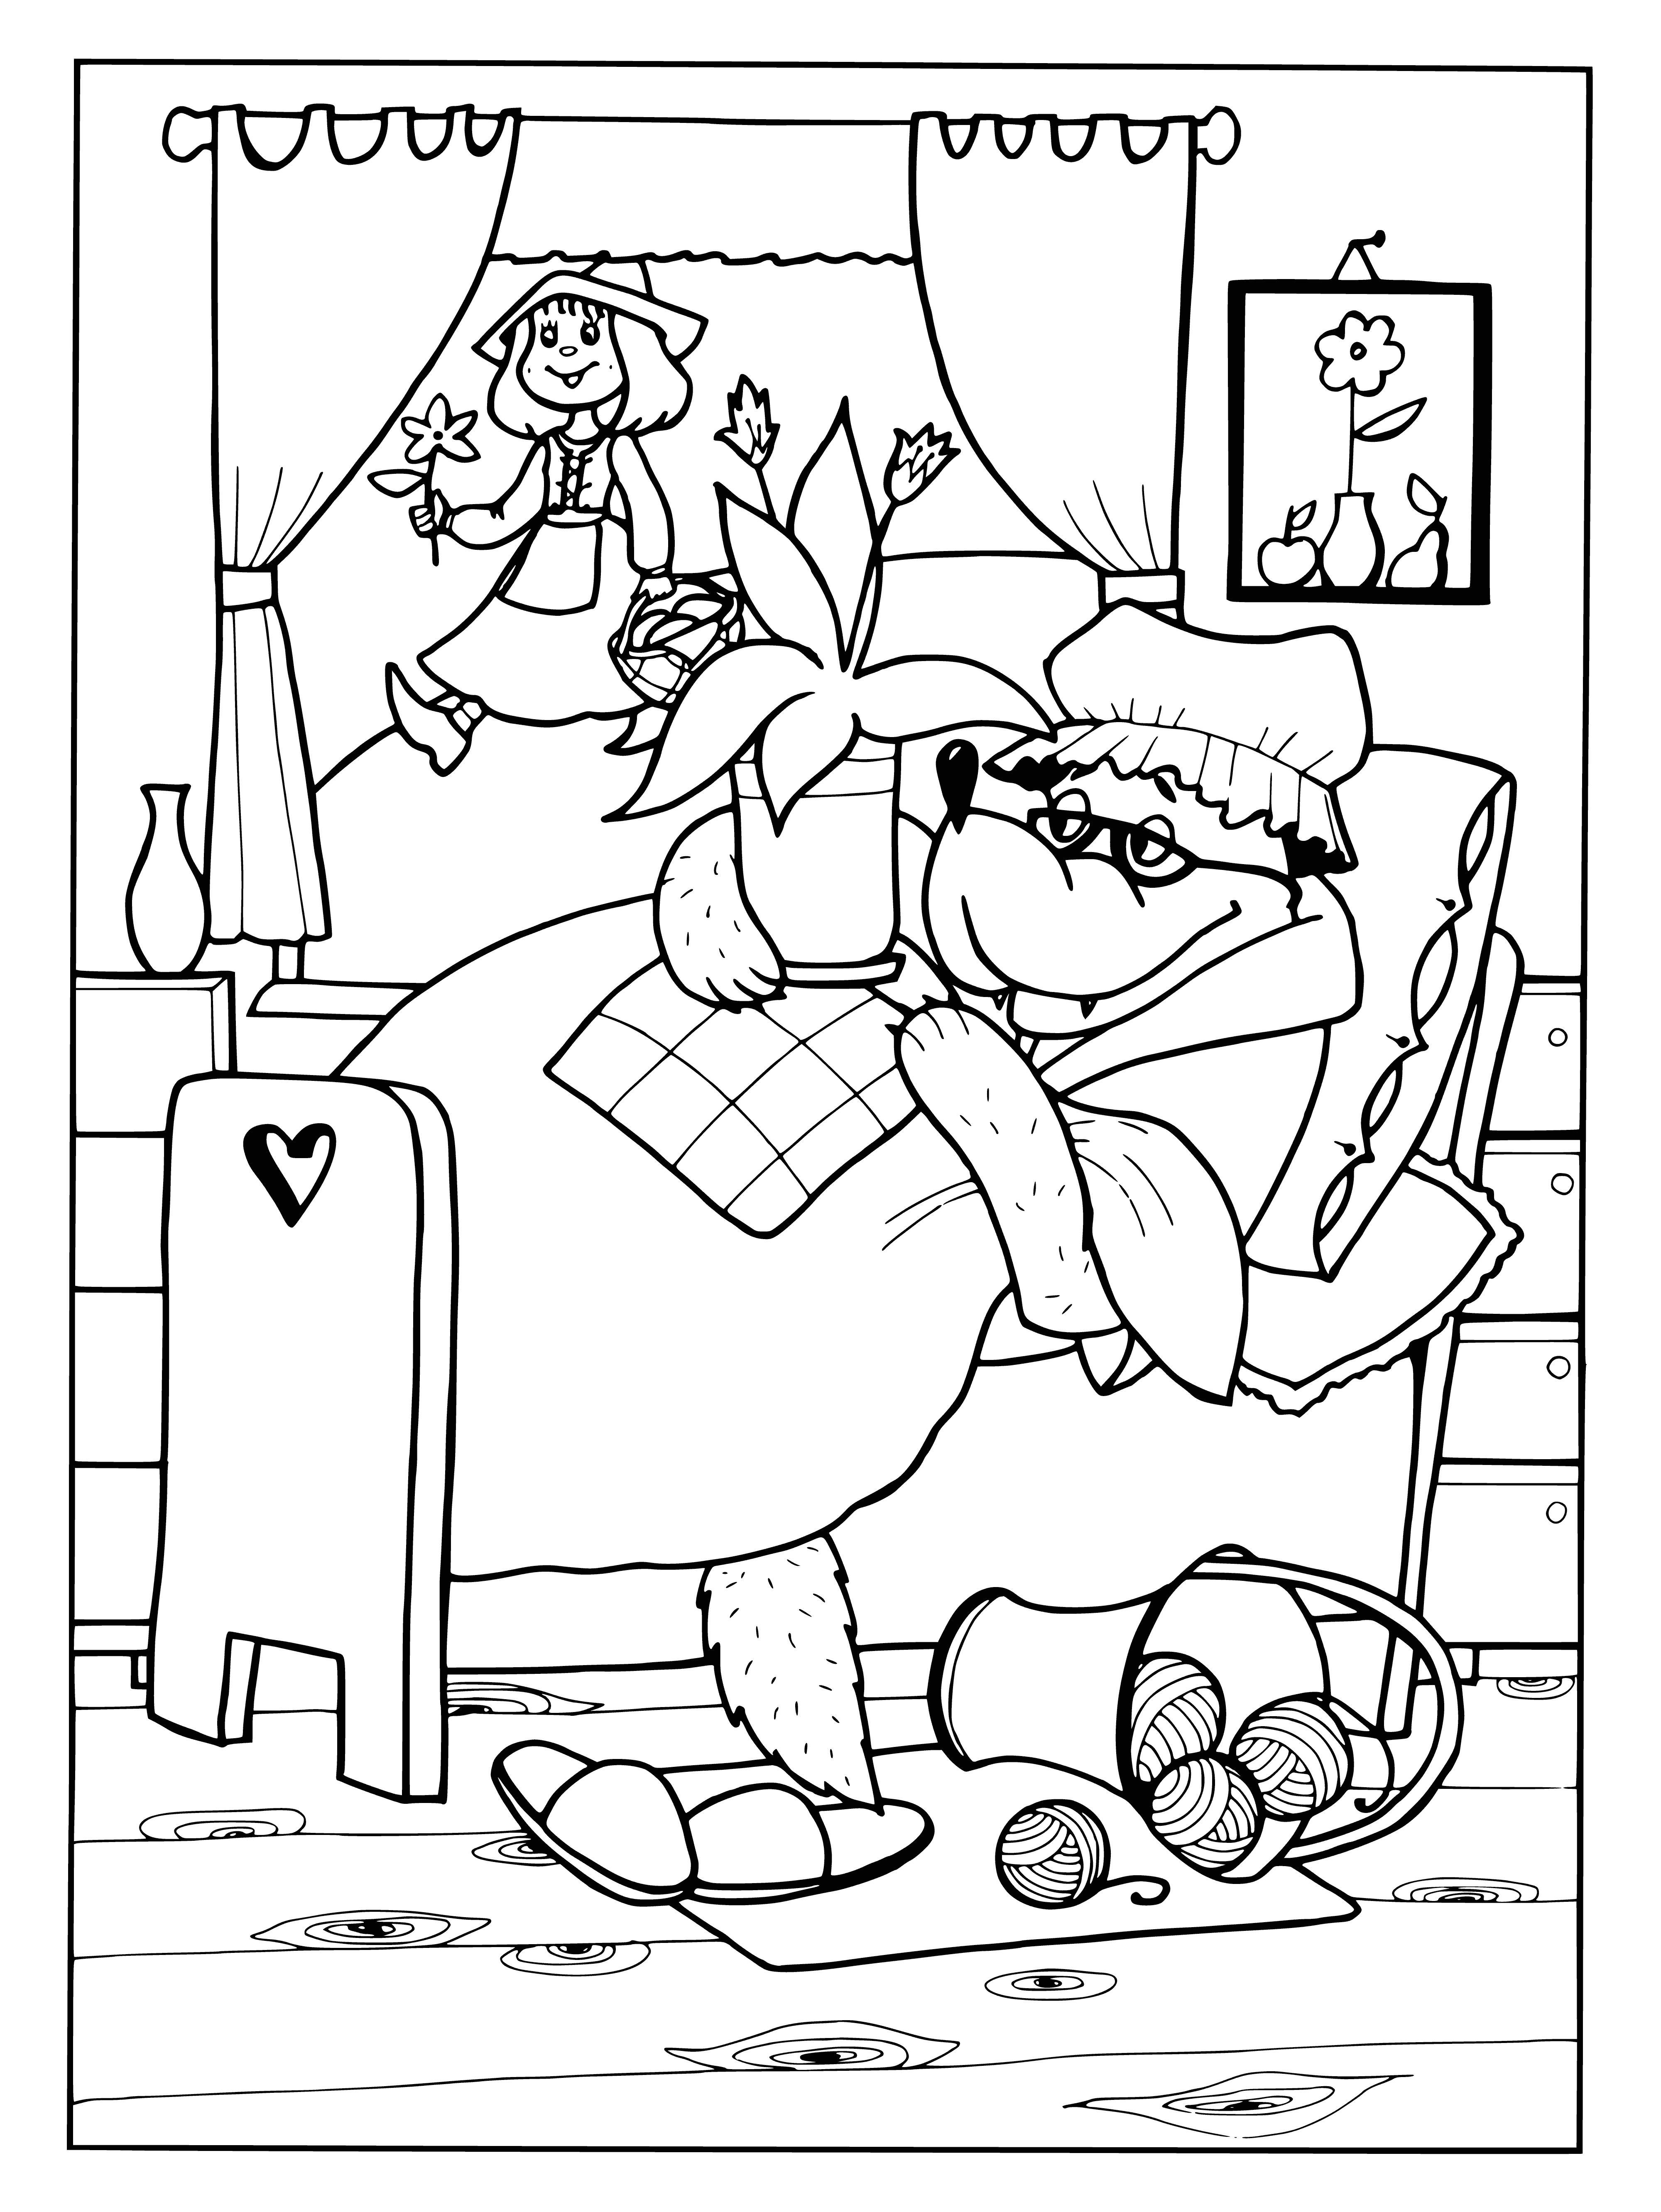 The wolf ate the grandmother coloring page